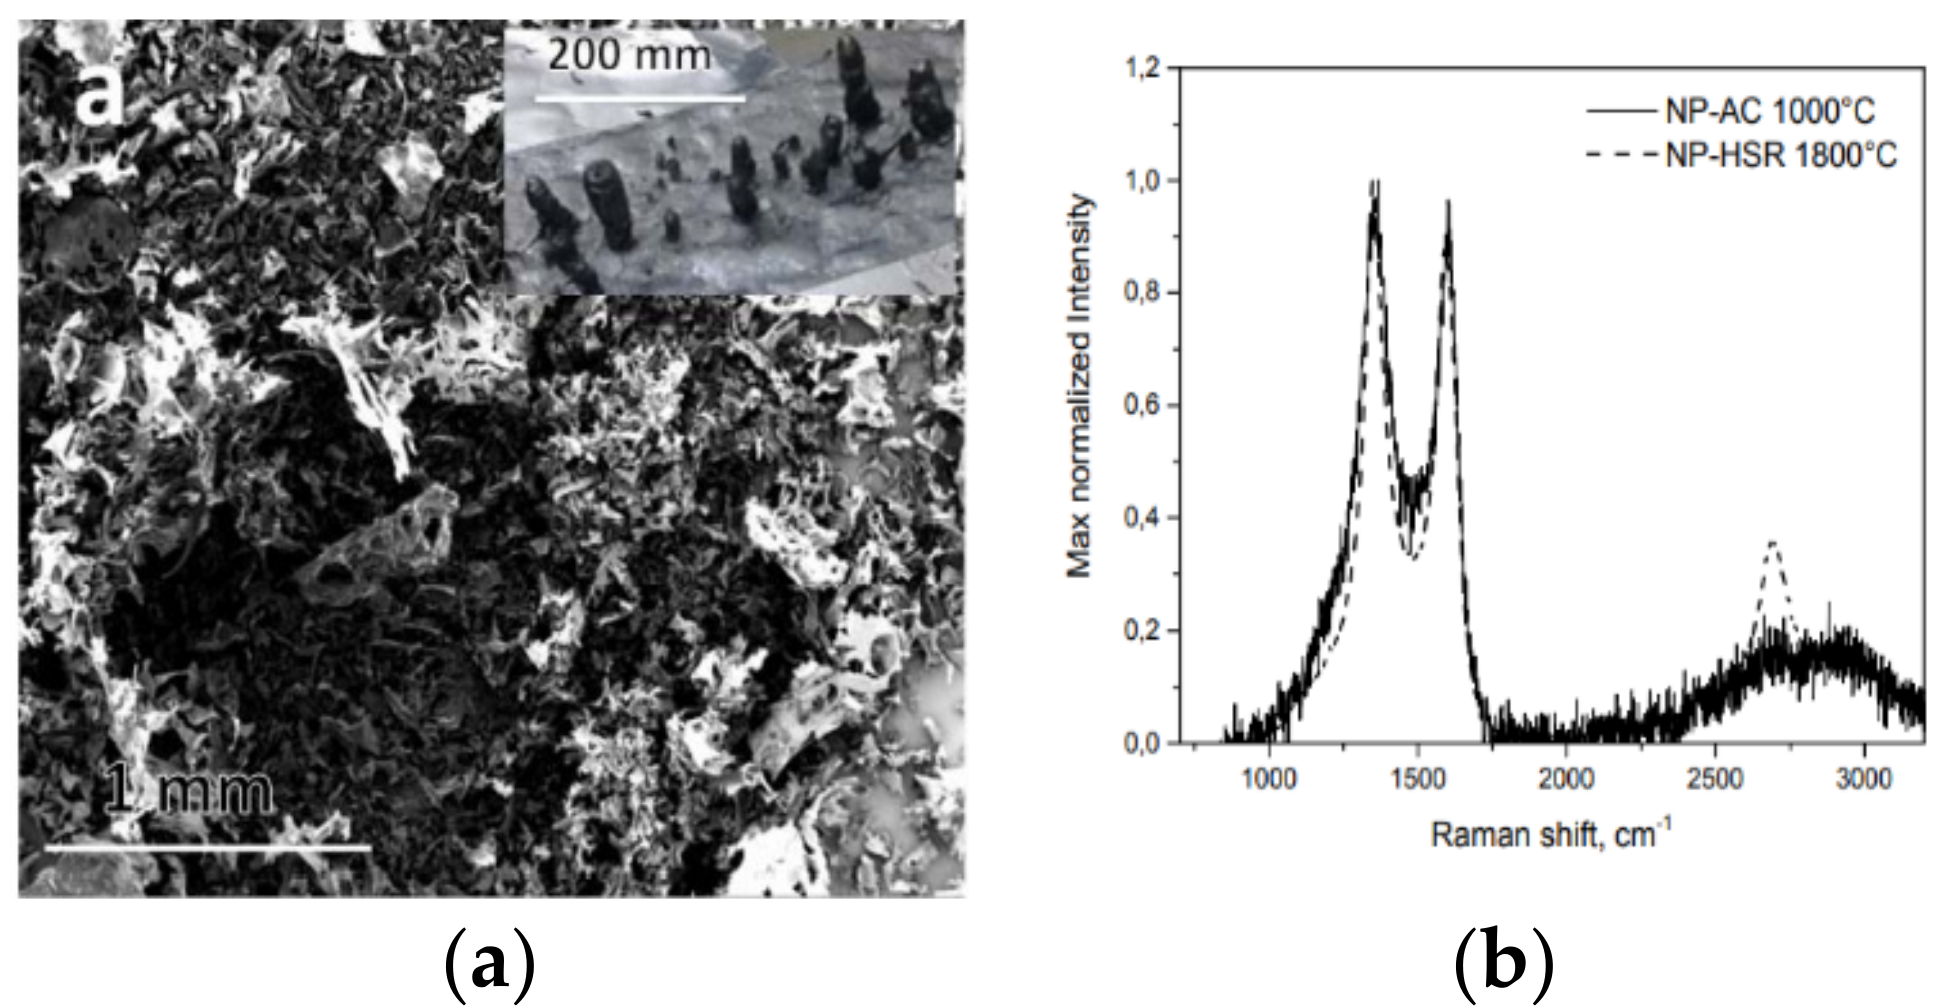 Nanostructured carbon material produced from Pitch pyrolysis at 1800 °C. (a): SEM images and, in the indent, morphology of produced char; (b) Raman spectra (from [34]).